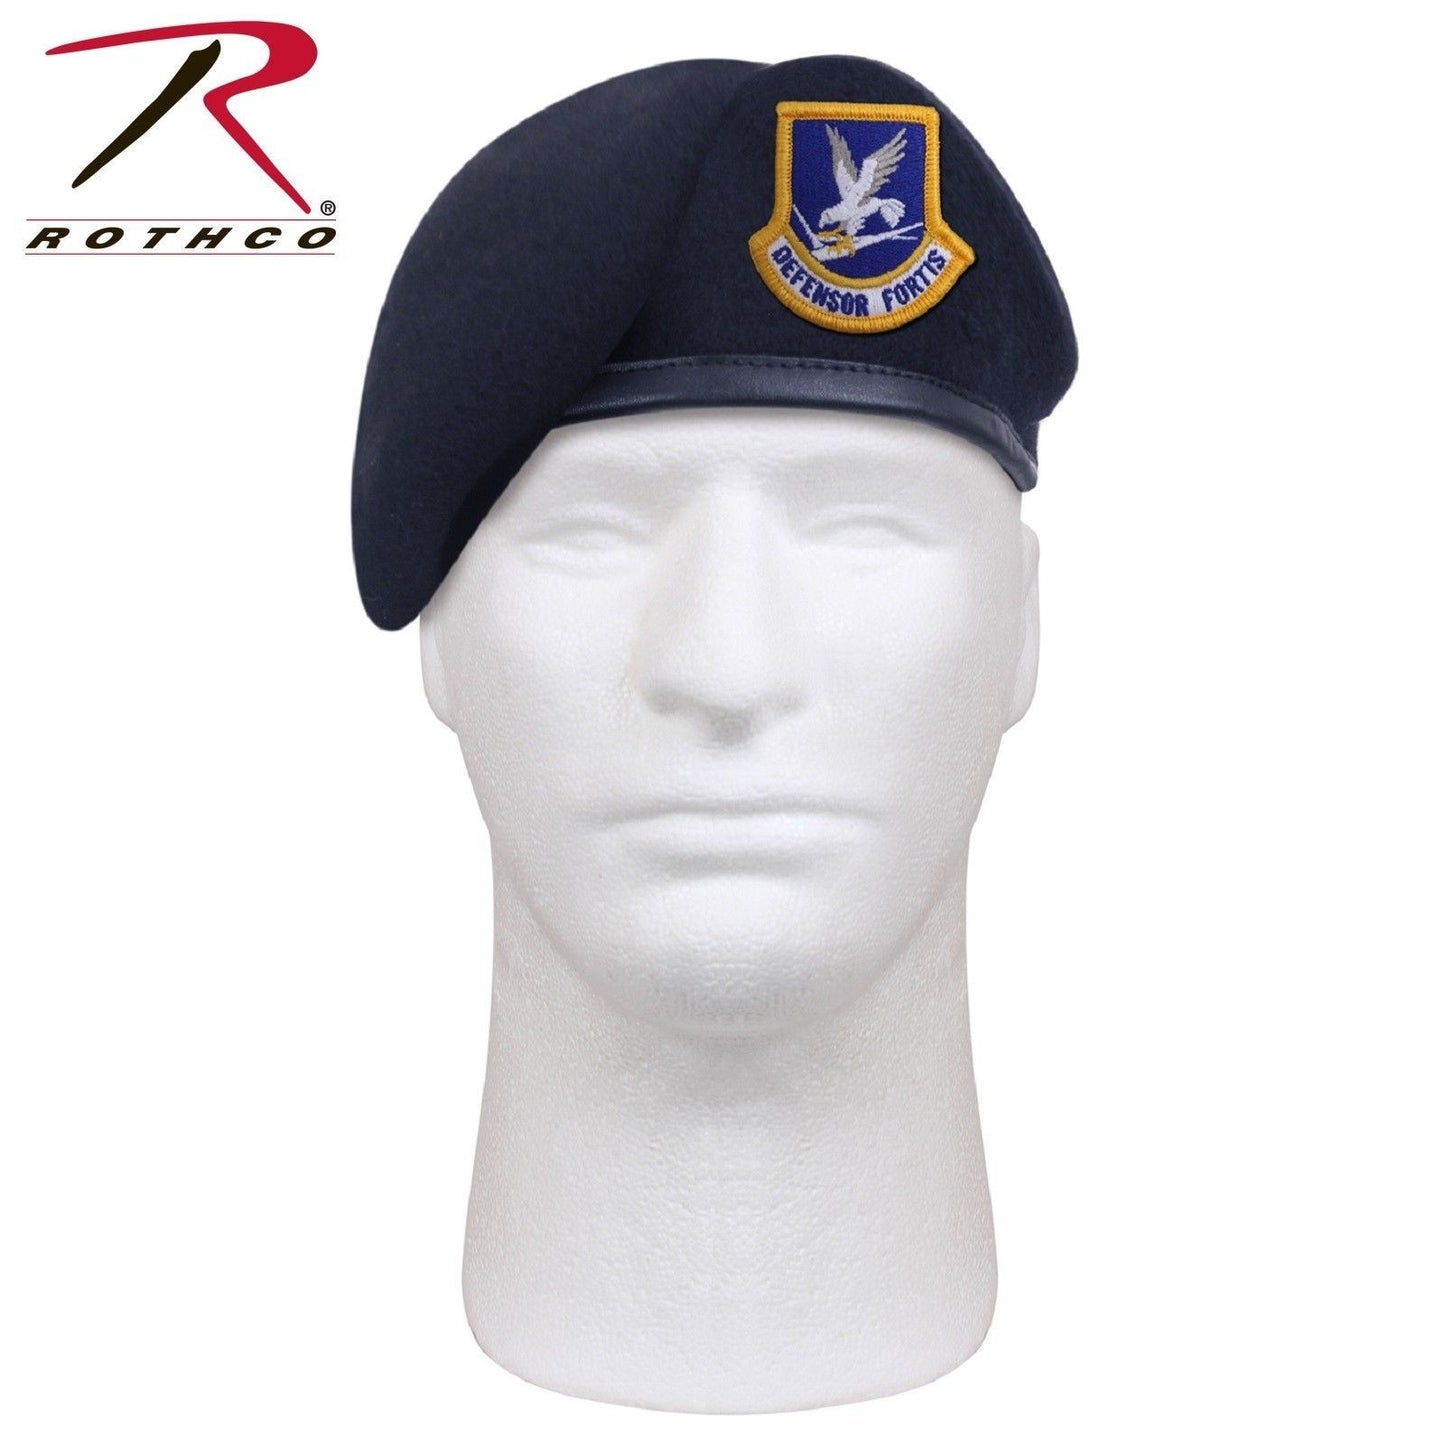 Rothco Inspection Ready Beret w/ USAF Flash - Midnight Navy Blue Air Force Beret